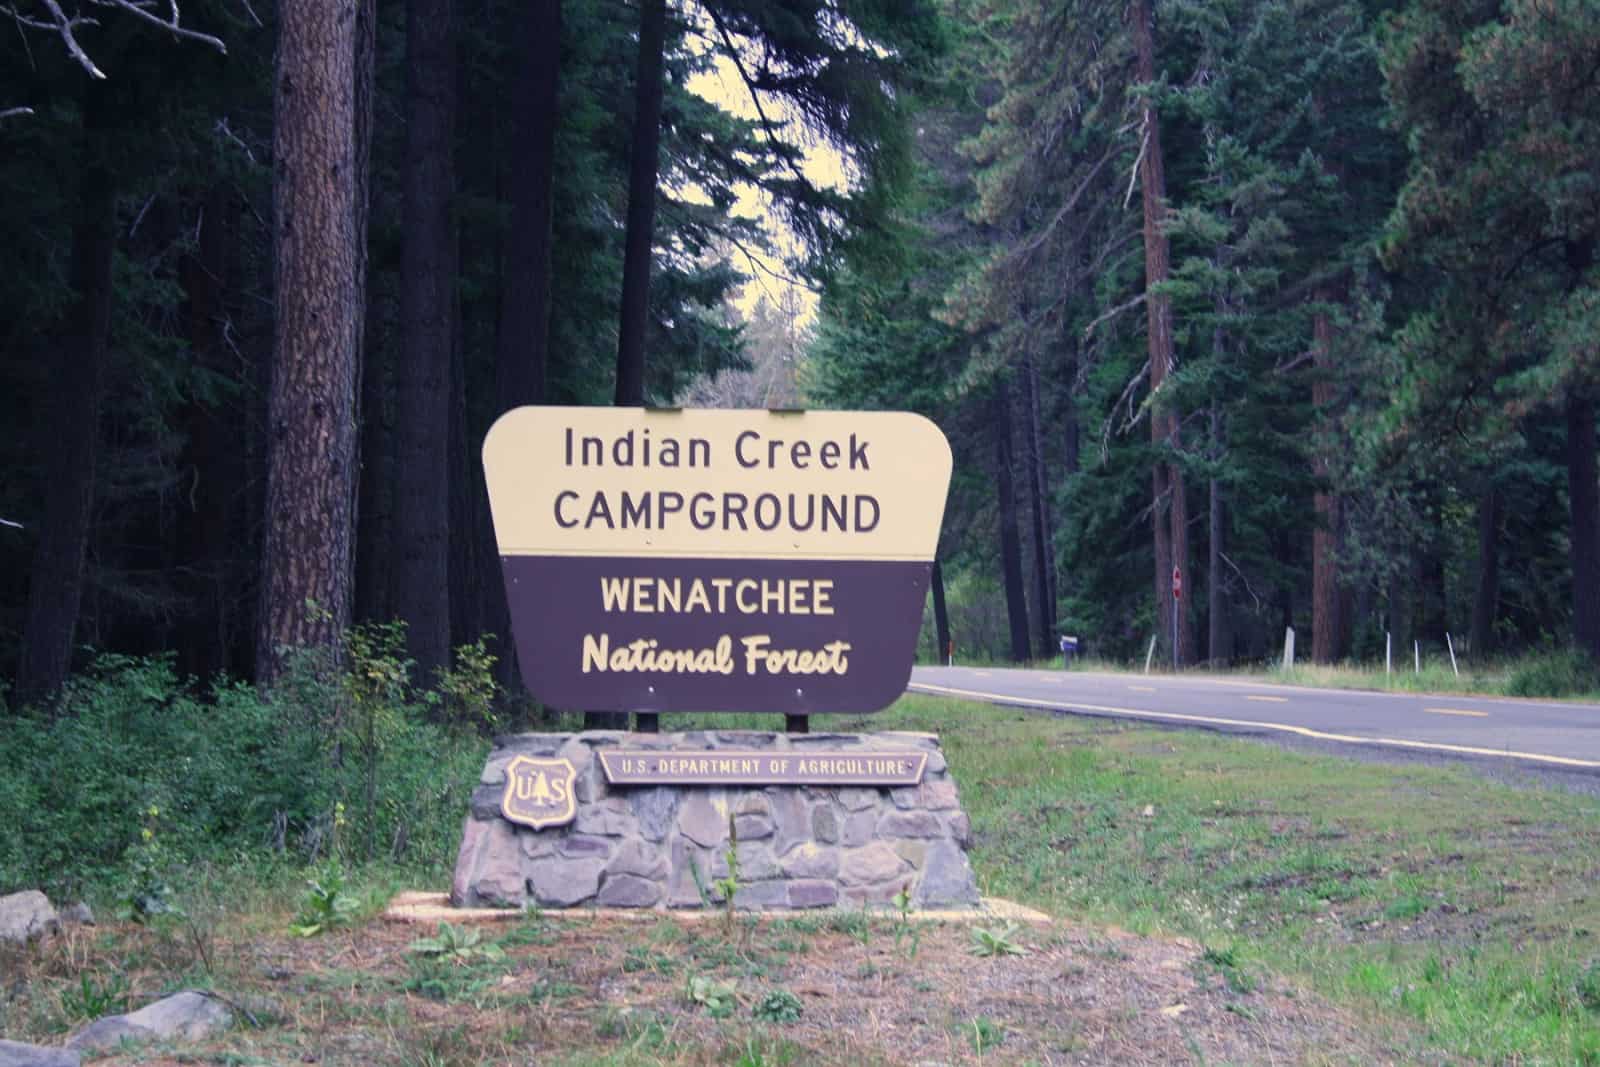 Indian Creek Campground sign